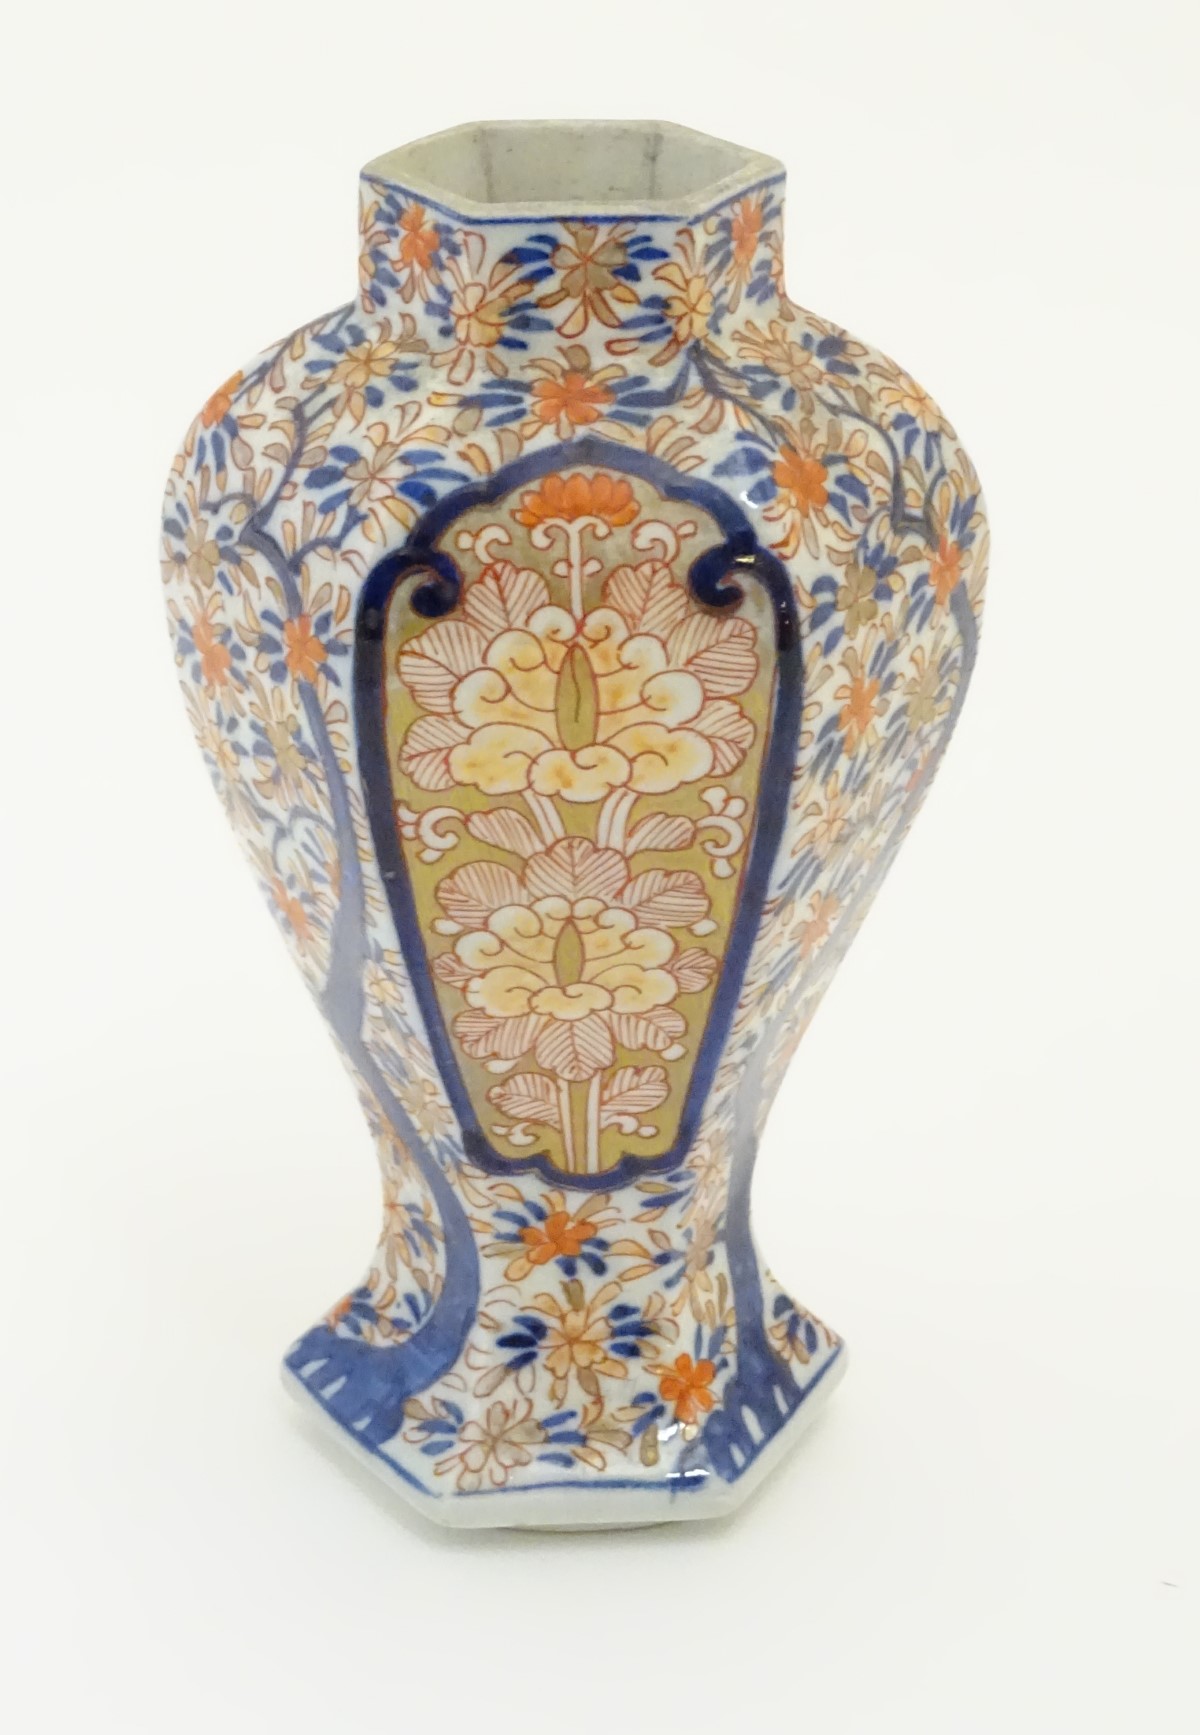 An Imari style hexagonal vase with panelled floral decoration and gilt highlights. 7 1/2" high.